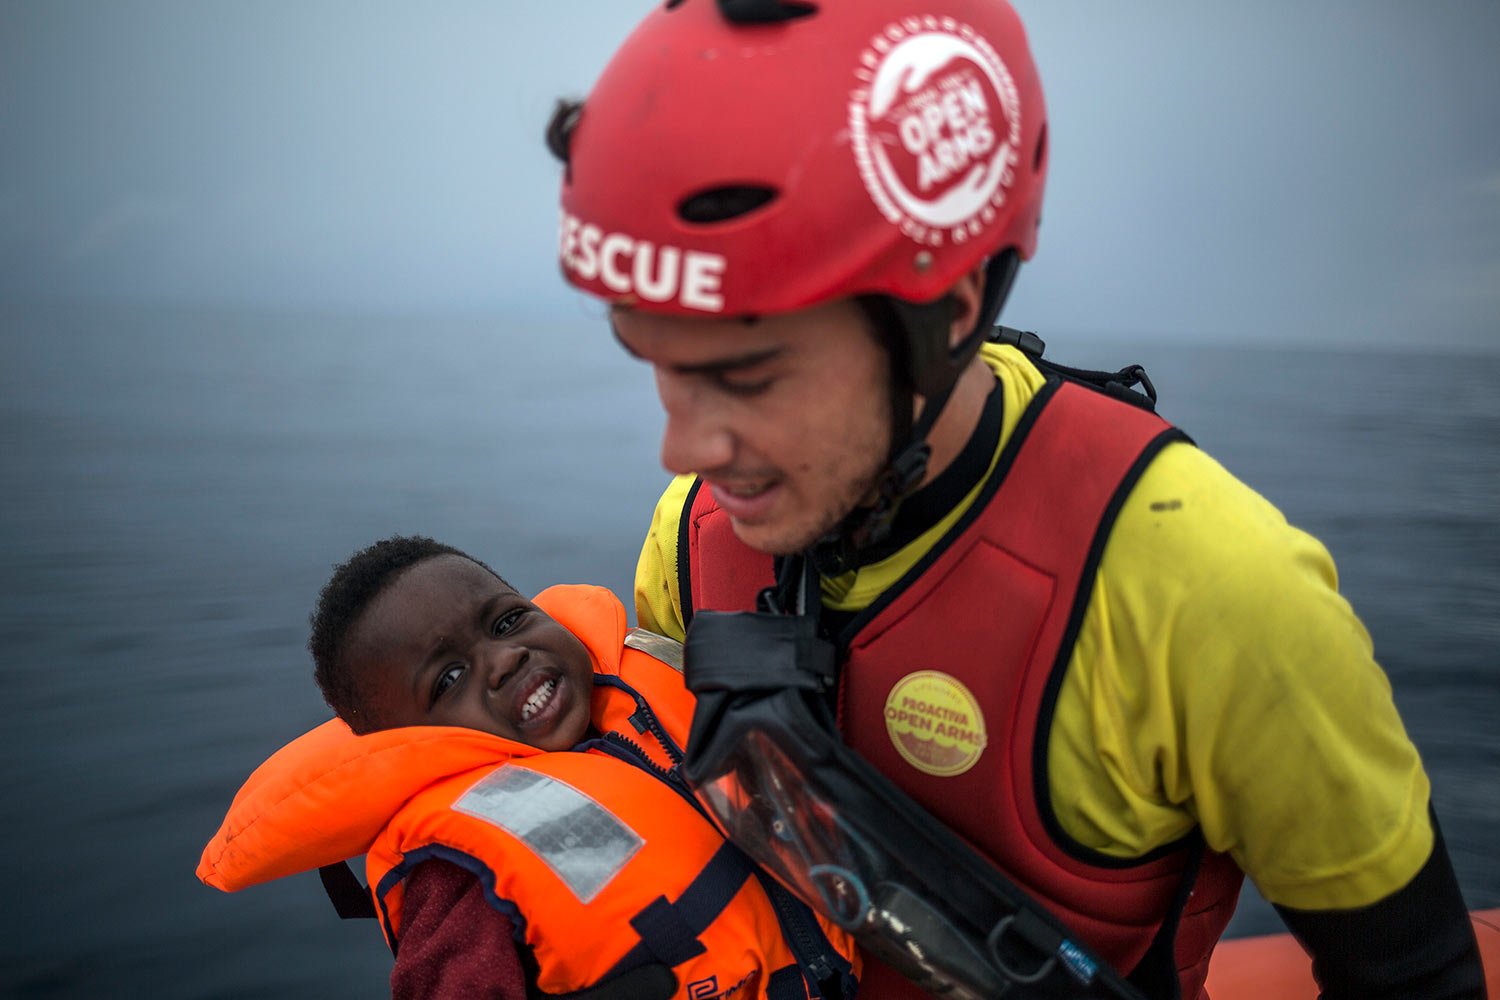  A member of Spanish NGO Pro activa Open Arms holds a baby rescued at a dinghy at Alboran Sea, about 40 miles (64 kms) from the Spanish coasts, Oct. 11 2018. The Open Arms is now based at Motril port in order to start operating in the western Mediter